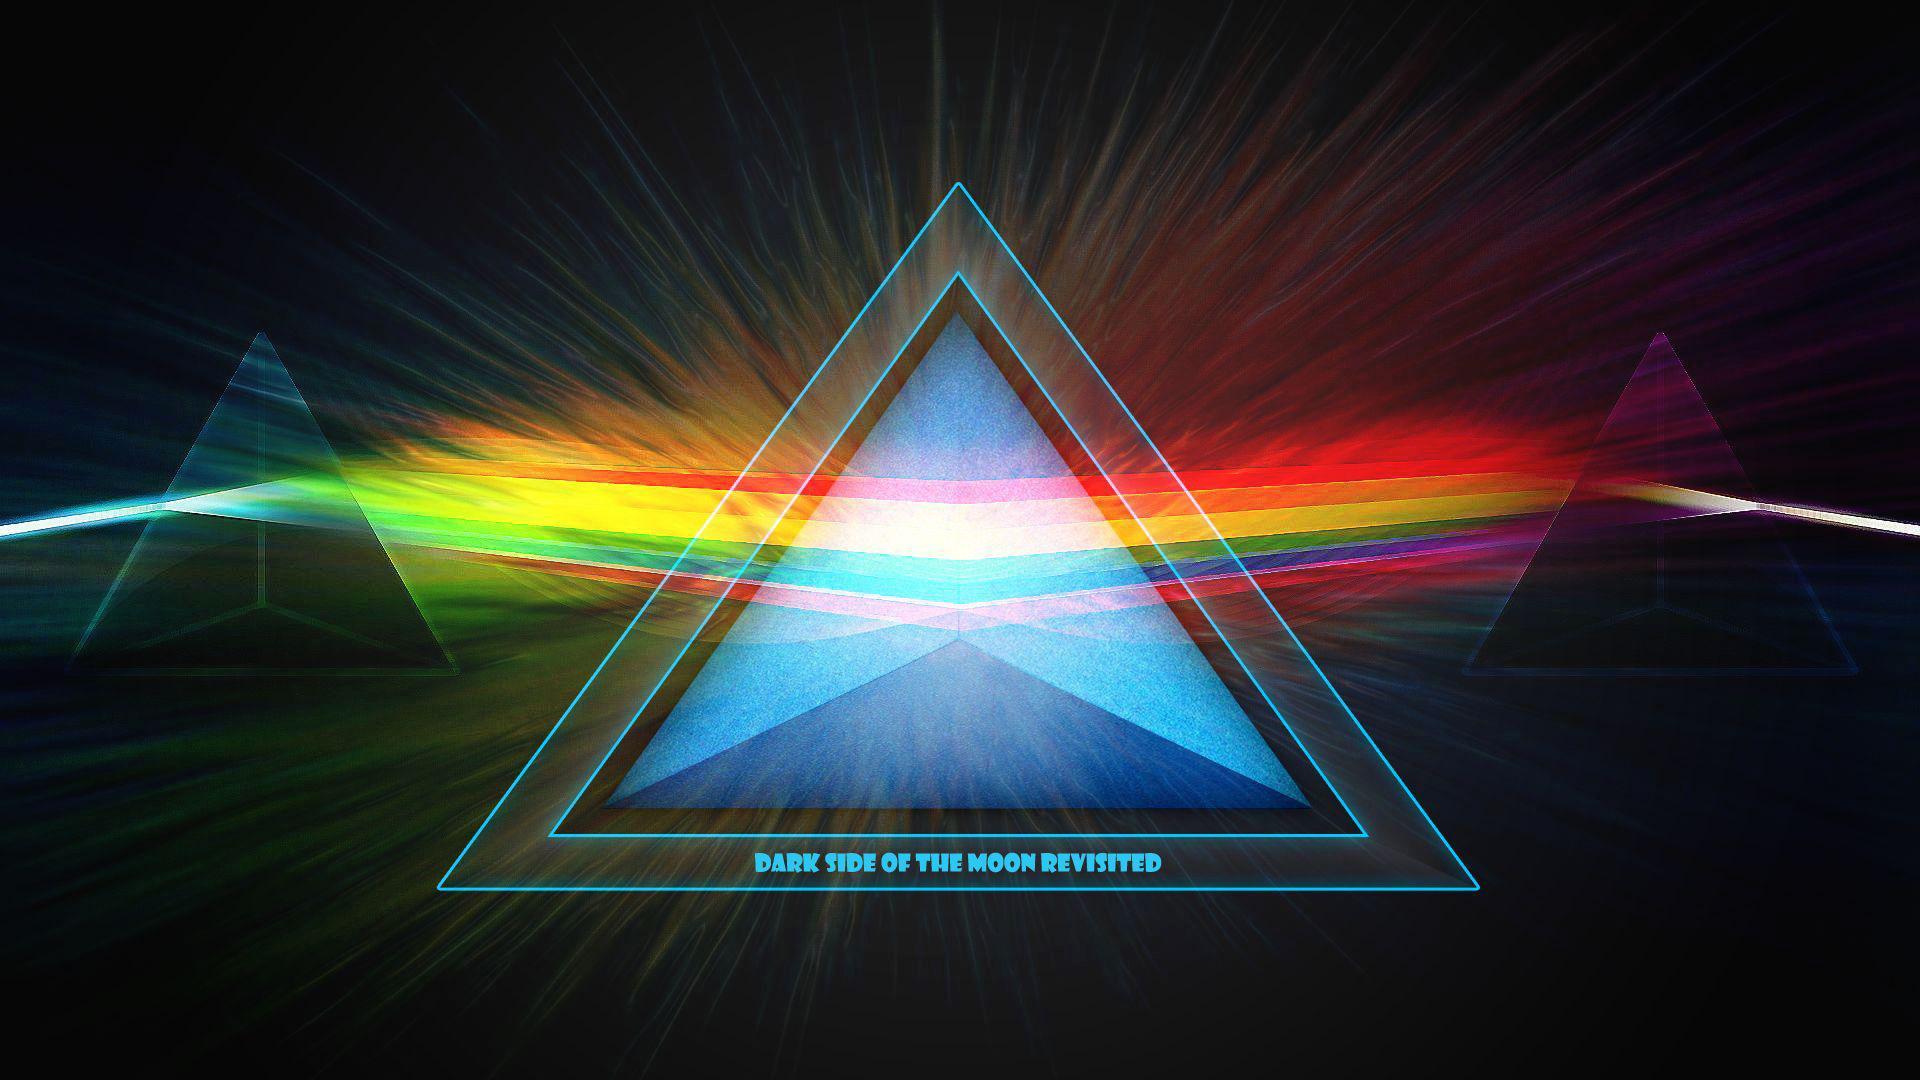 Dark Side Of The Moon Revisited wallpapers